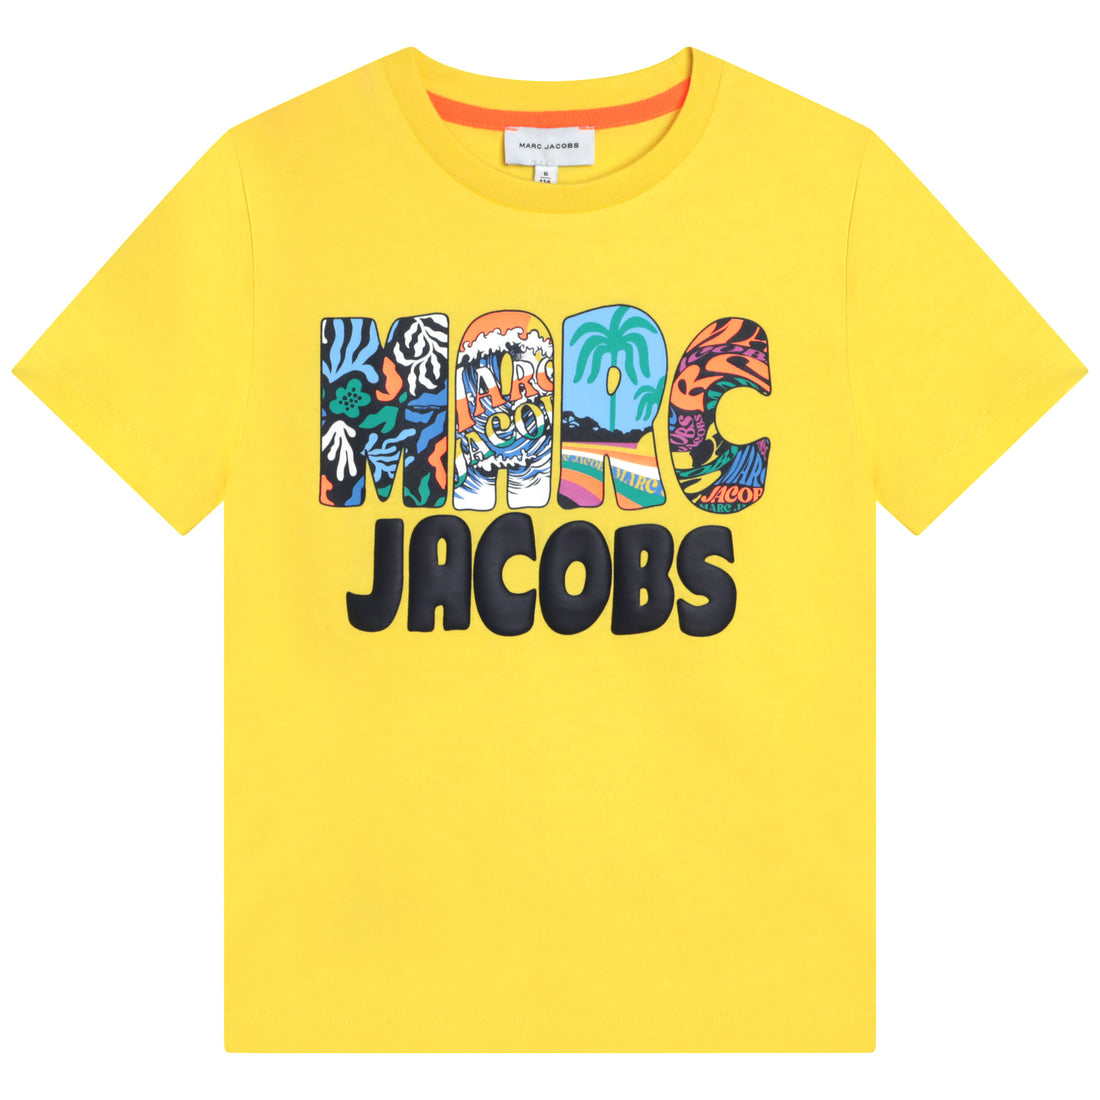 Marc Jacobs Short Sleeves Tee-Shirt Style: W25593